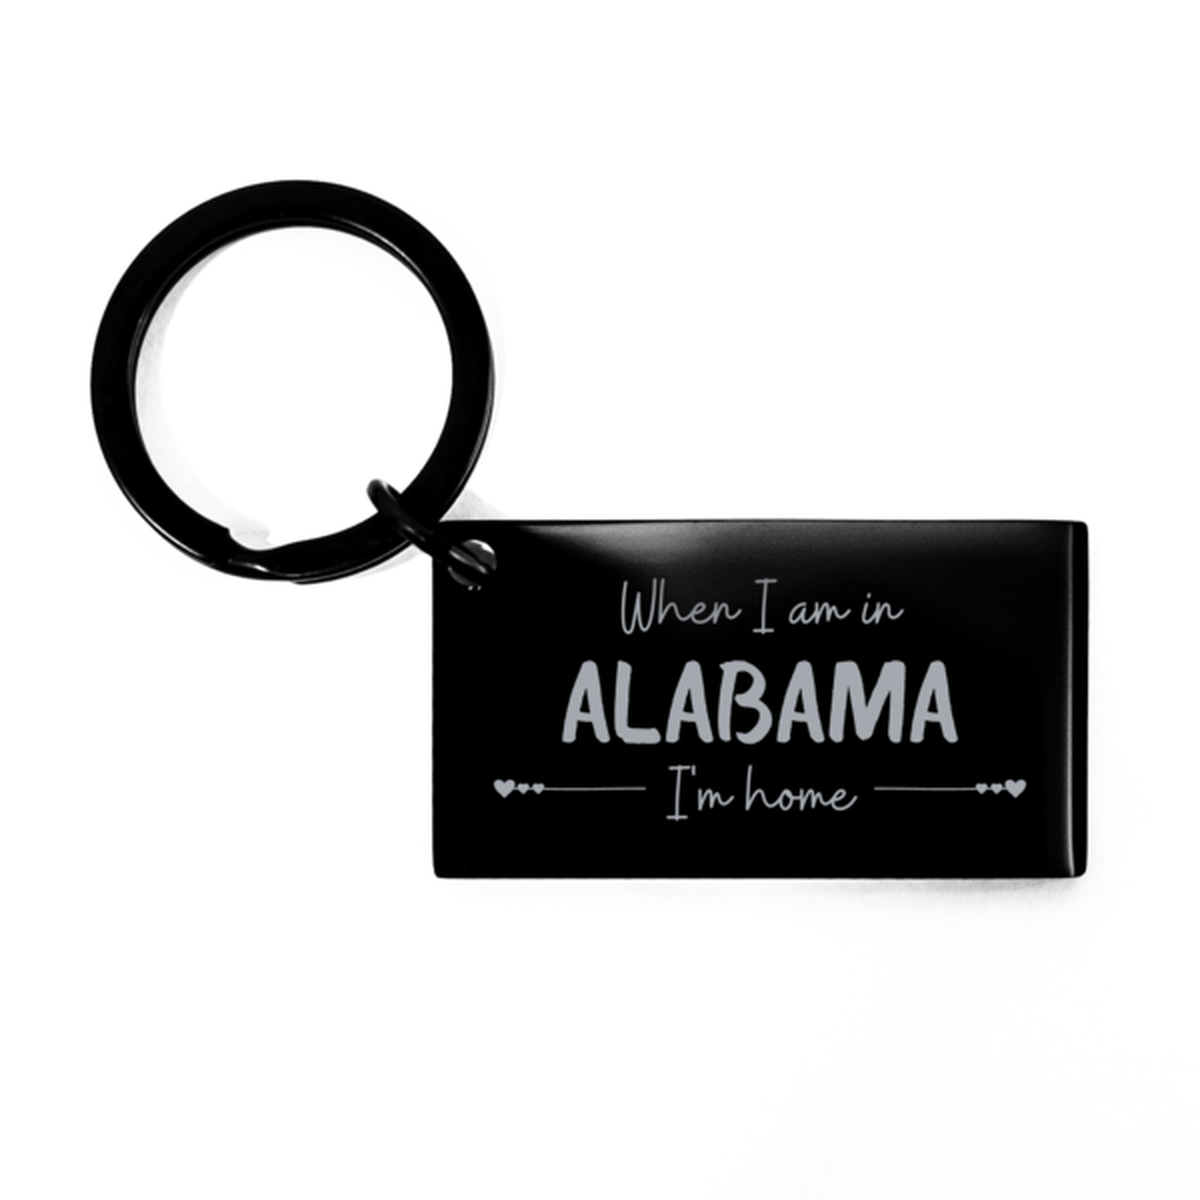 When I am in Alabama I'm home Keychain, Cheap Gifts For Alabama, State Alabama Birthday Gifts for Friends Coworker